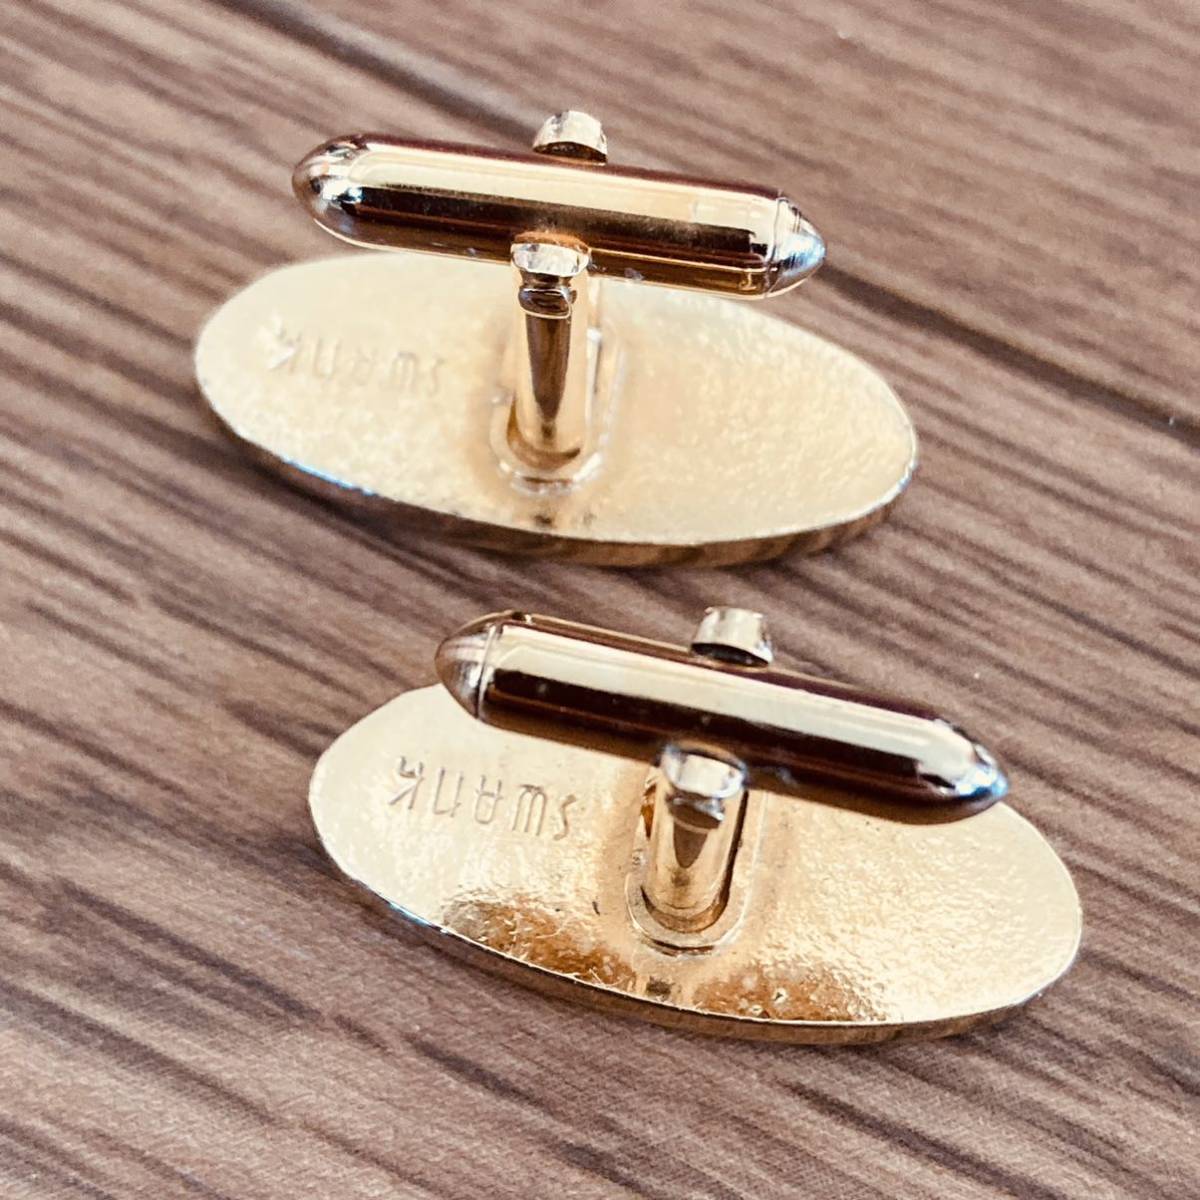  free shipping US Vintage cuff links SWANKs one k leaf Gold tone cuffs button 